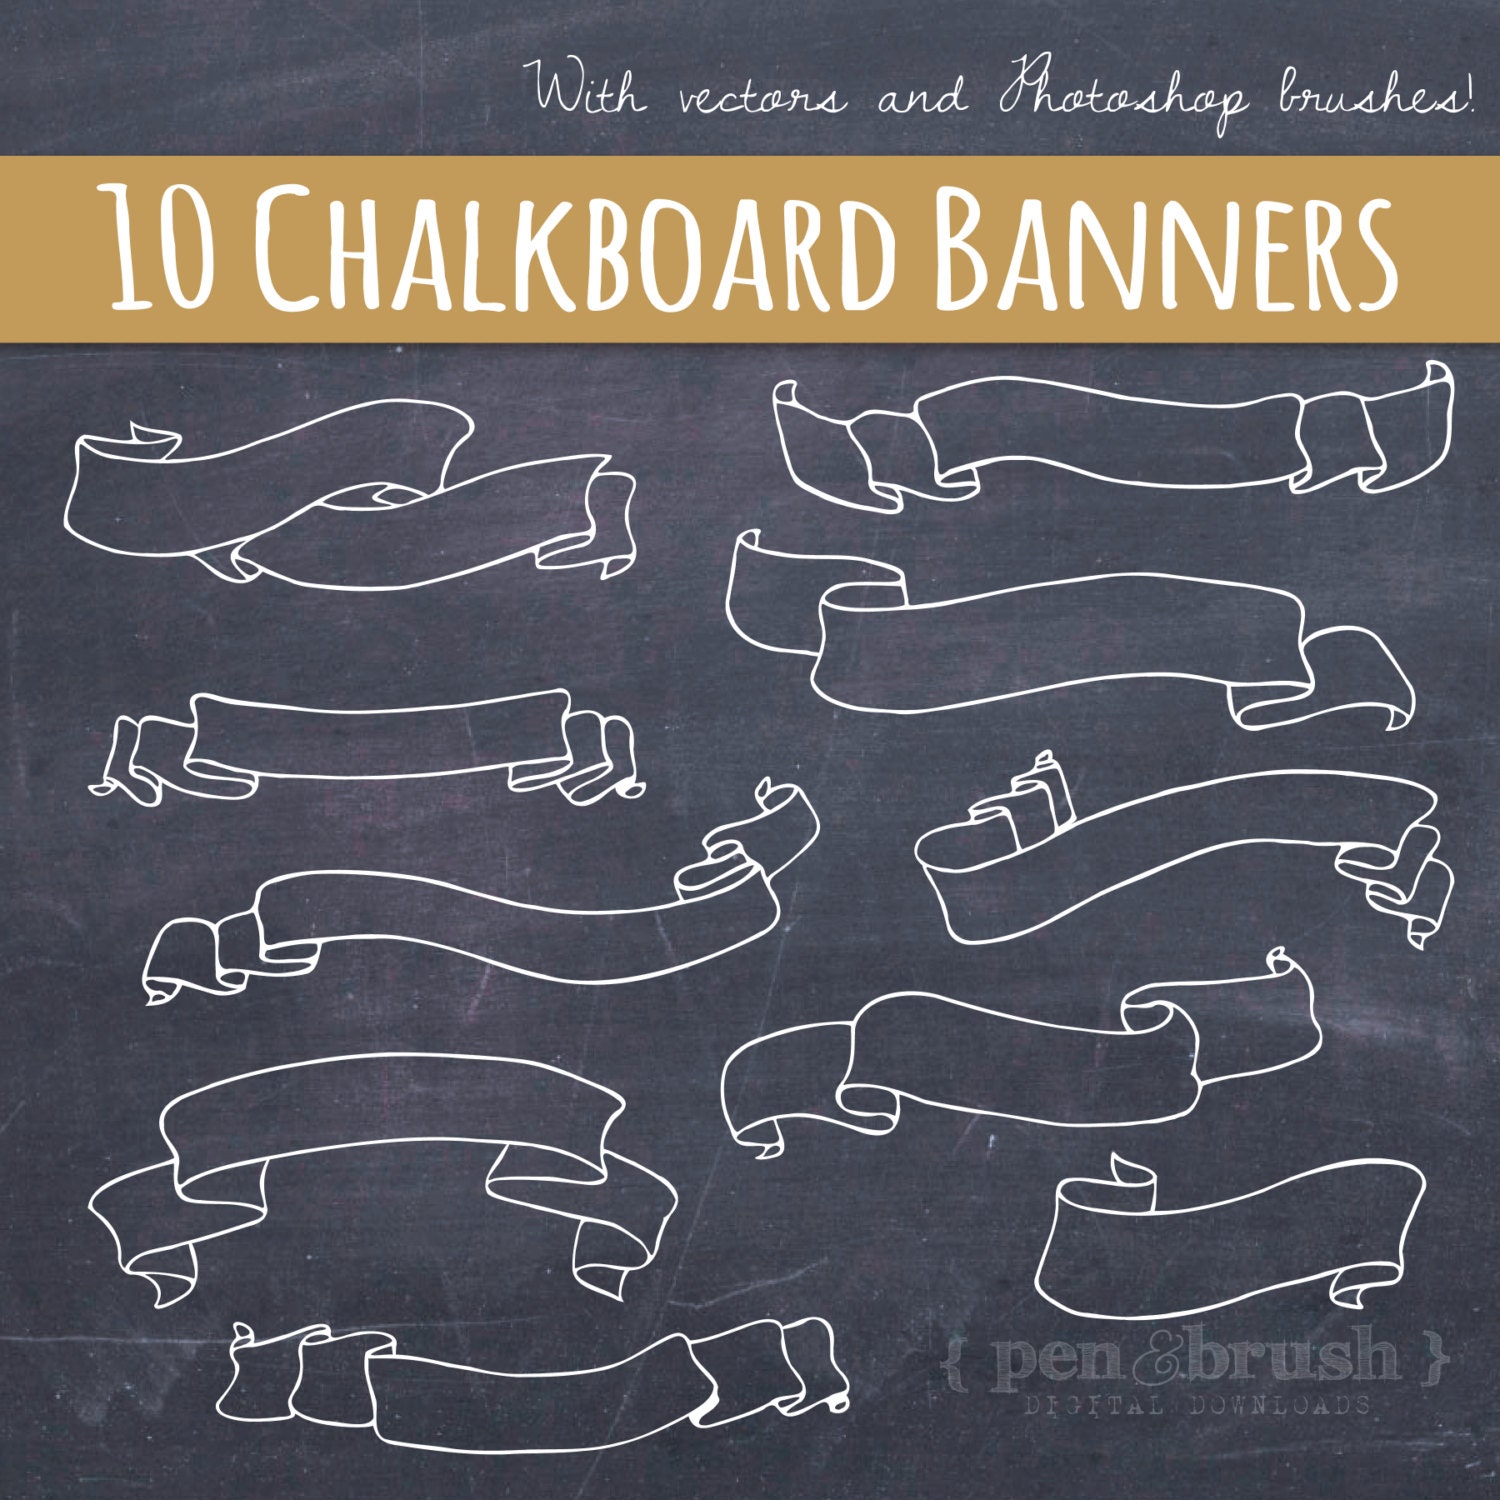 listing161553891chalkboard banners ribbons clip art hand